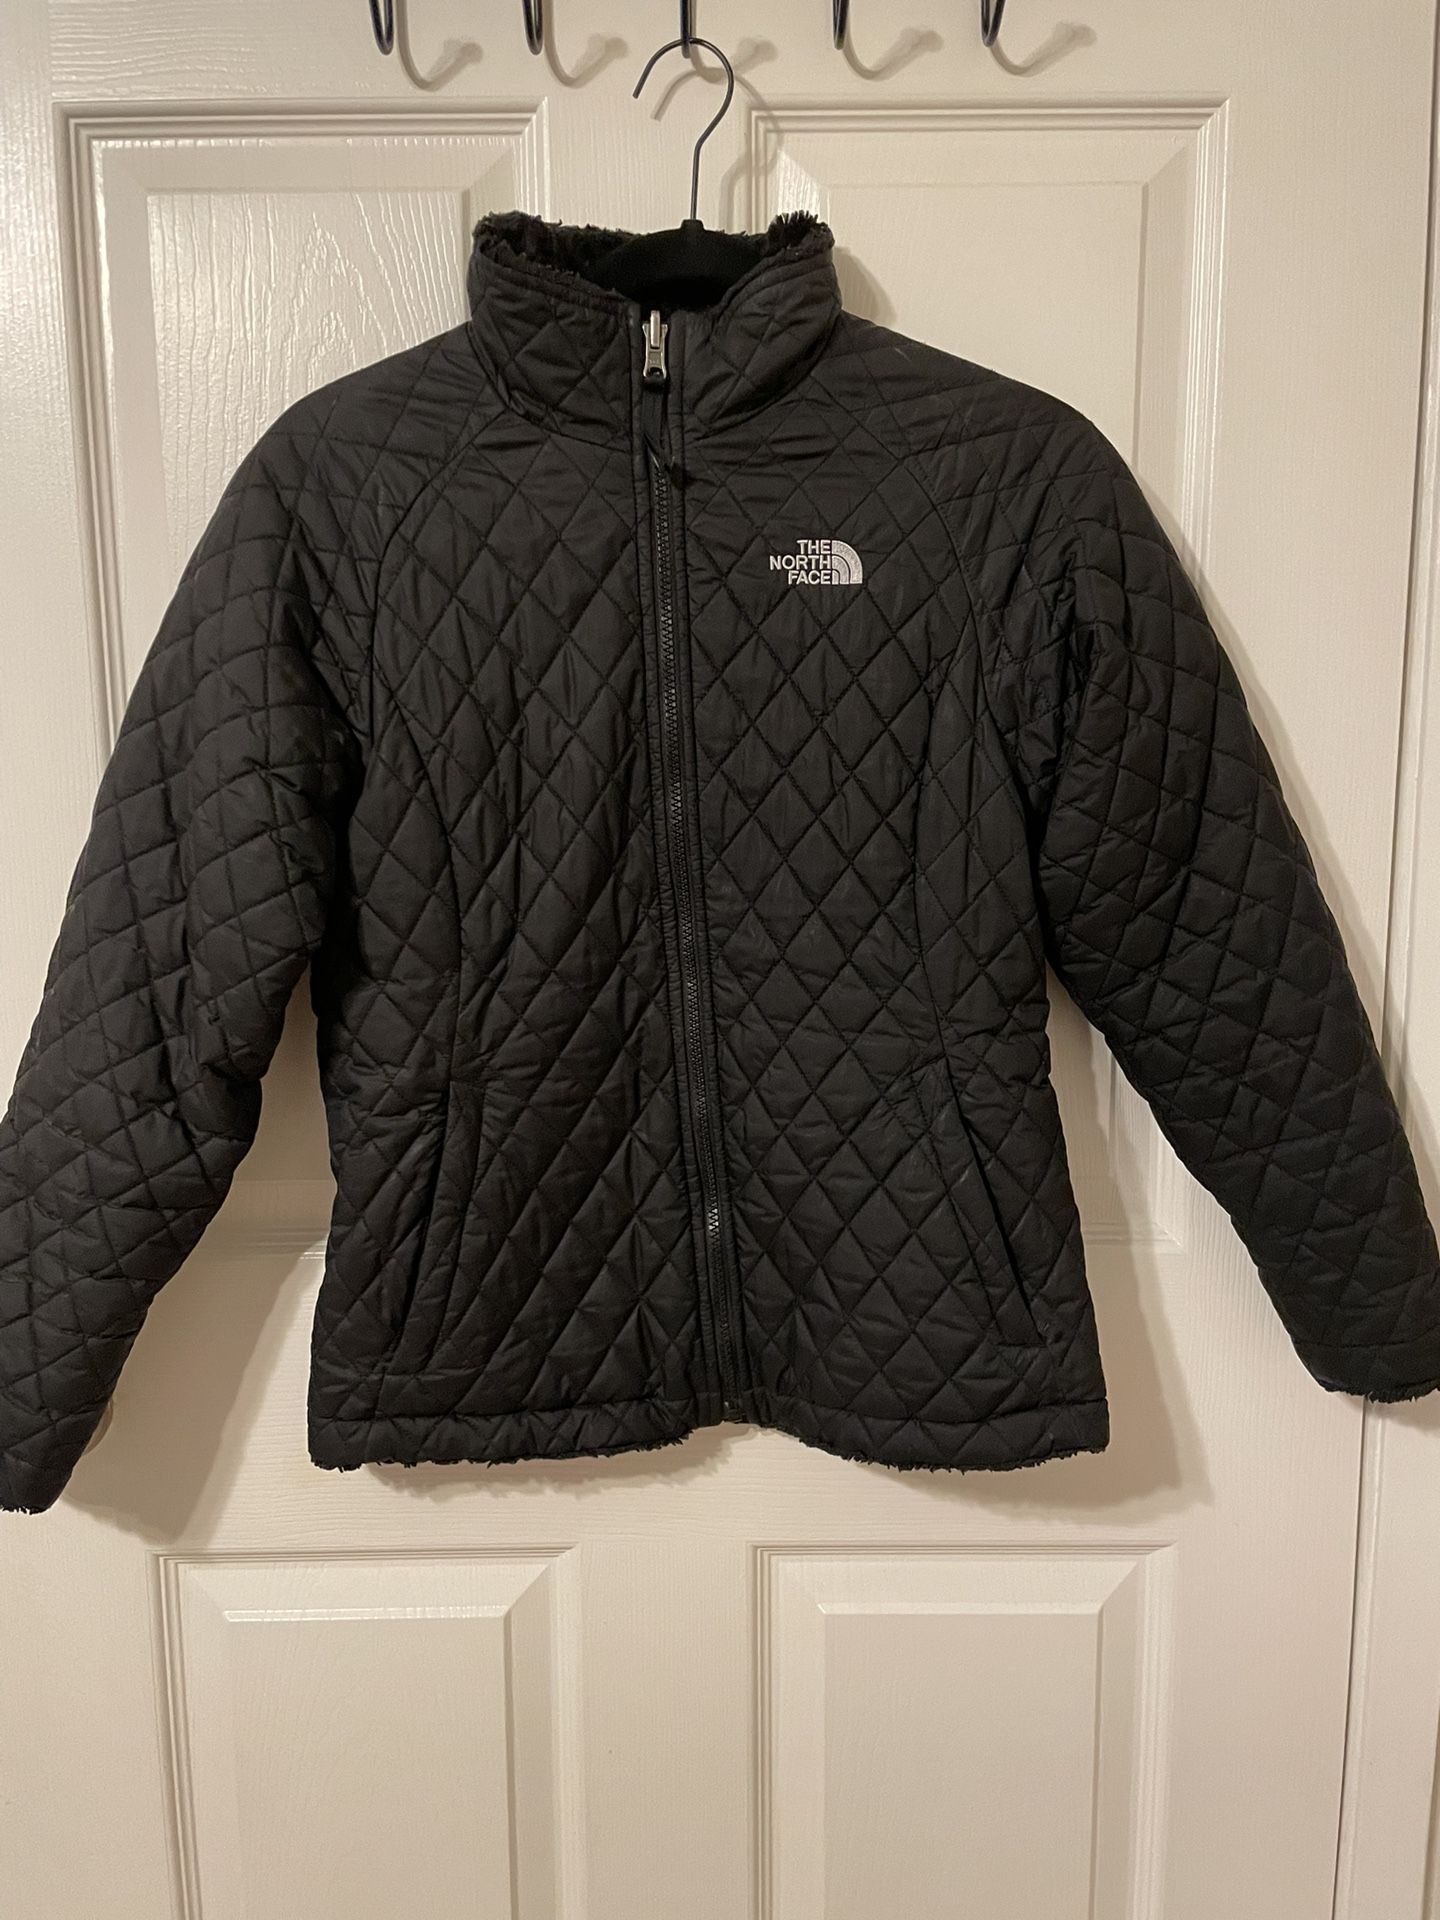 Girls The North Face Reversible Jacket Size Large 14/16 also fits as Womens size XS